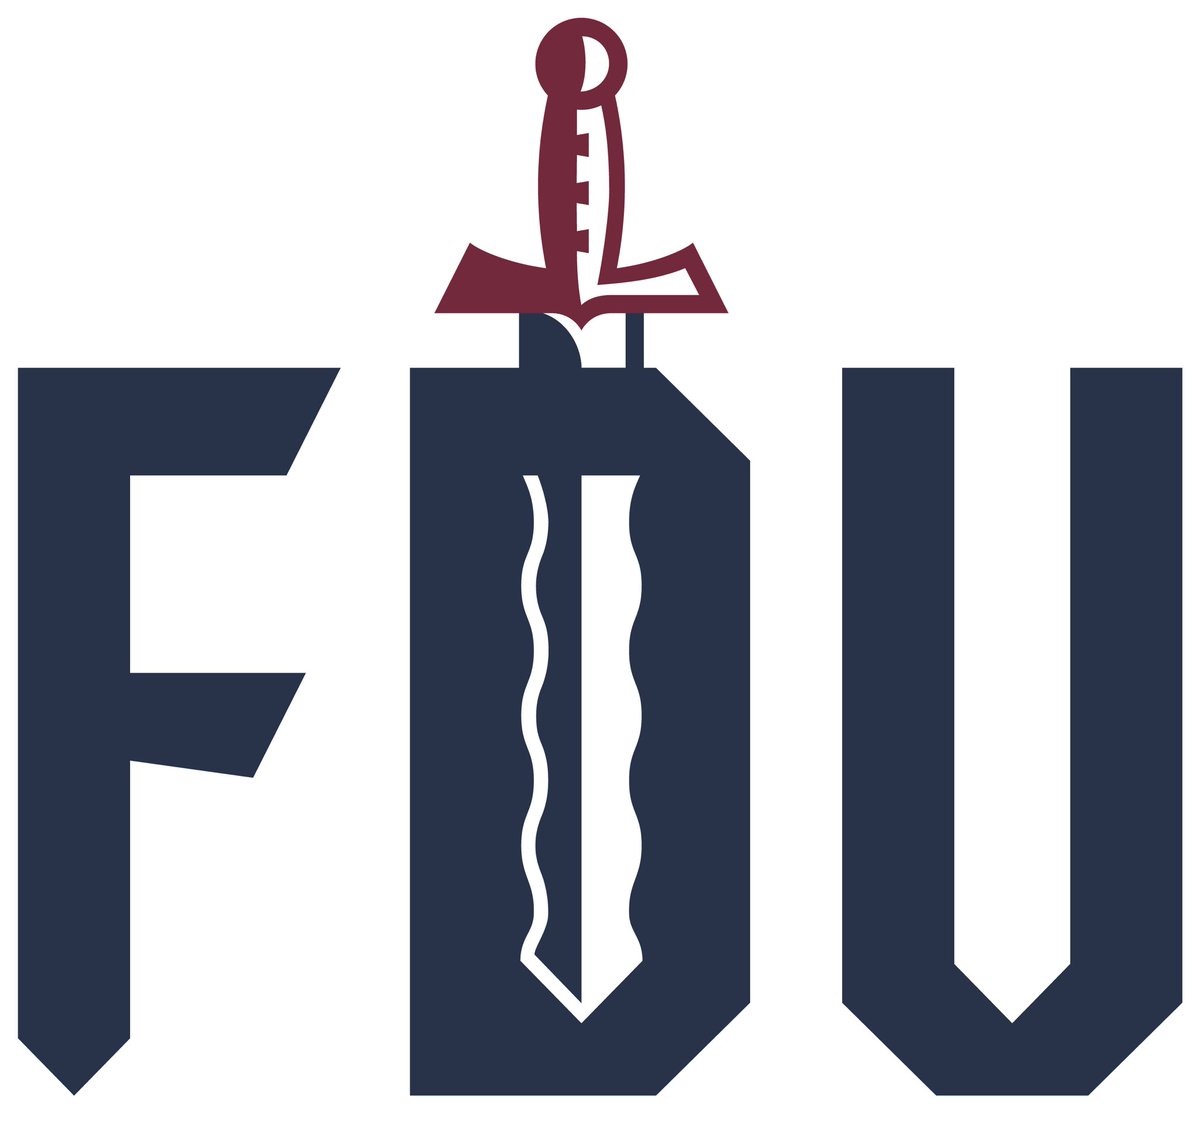 Excited to announce that I’ll be joining @FDUKnights as an Athletic Media Relations Graduate Assistant! I’ll be working as an SID, and helping in creative content. Thank you to everyone who’s helped me along the way to get here!

#uKNIGHTED ⚔️